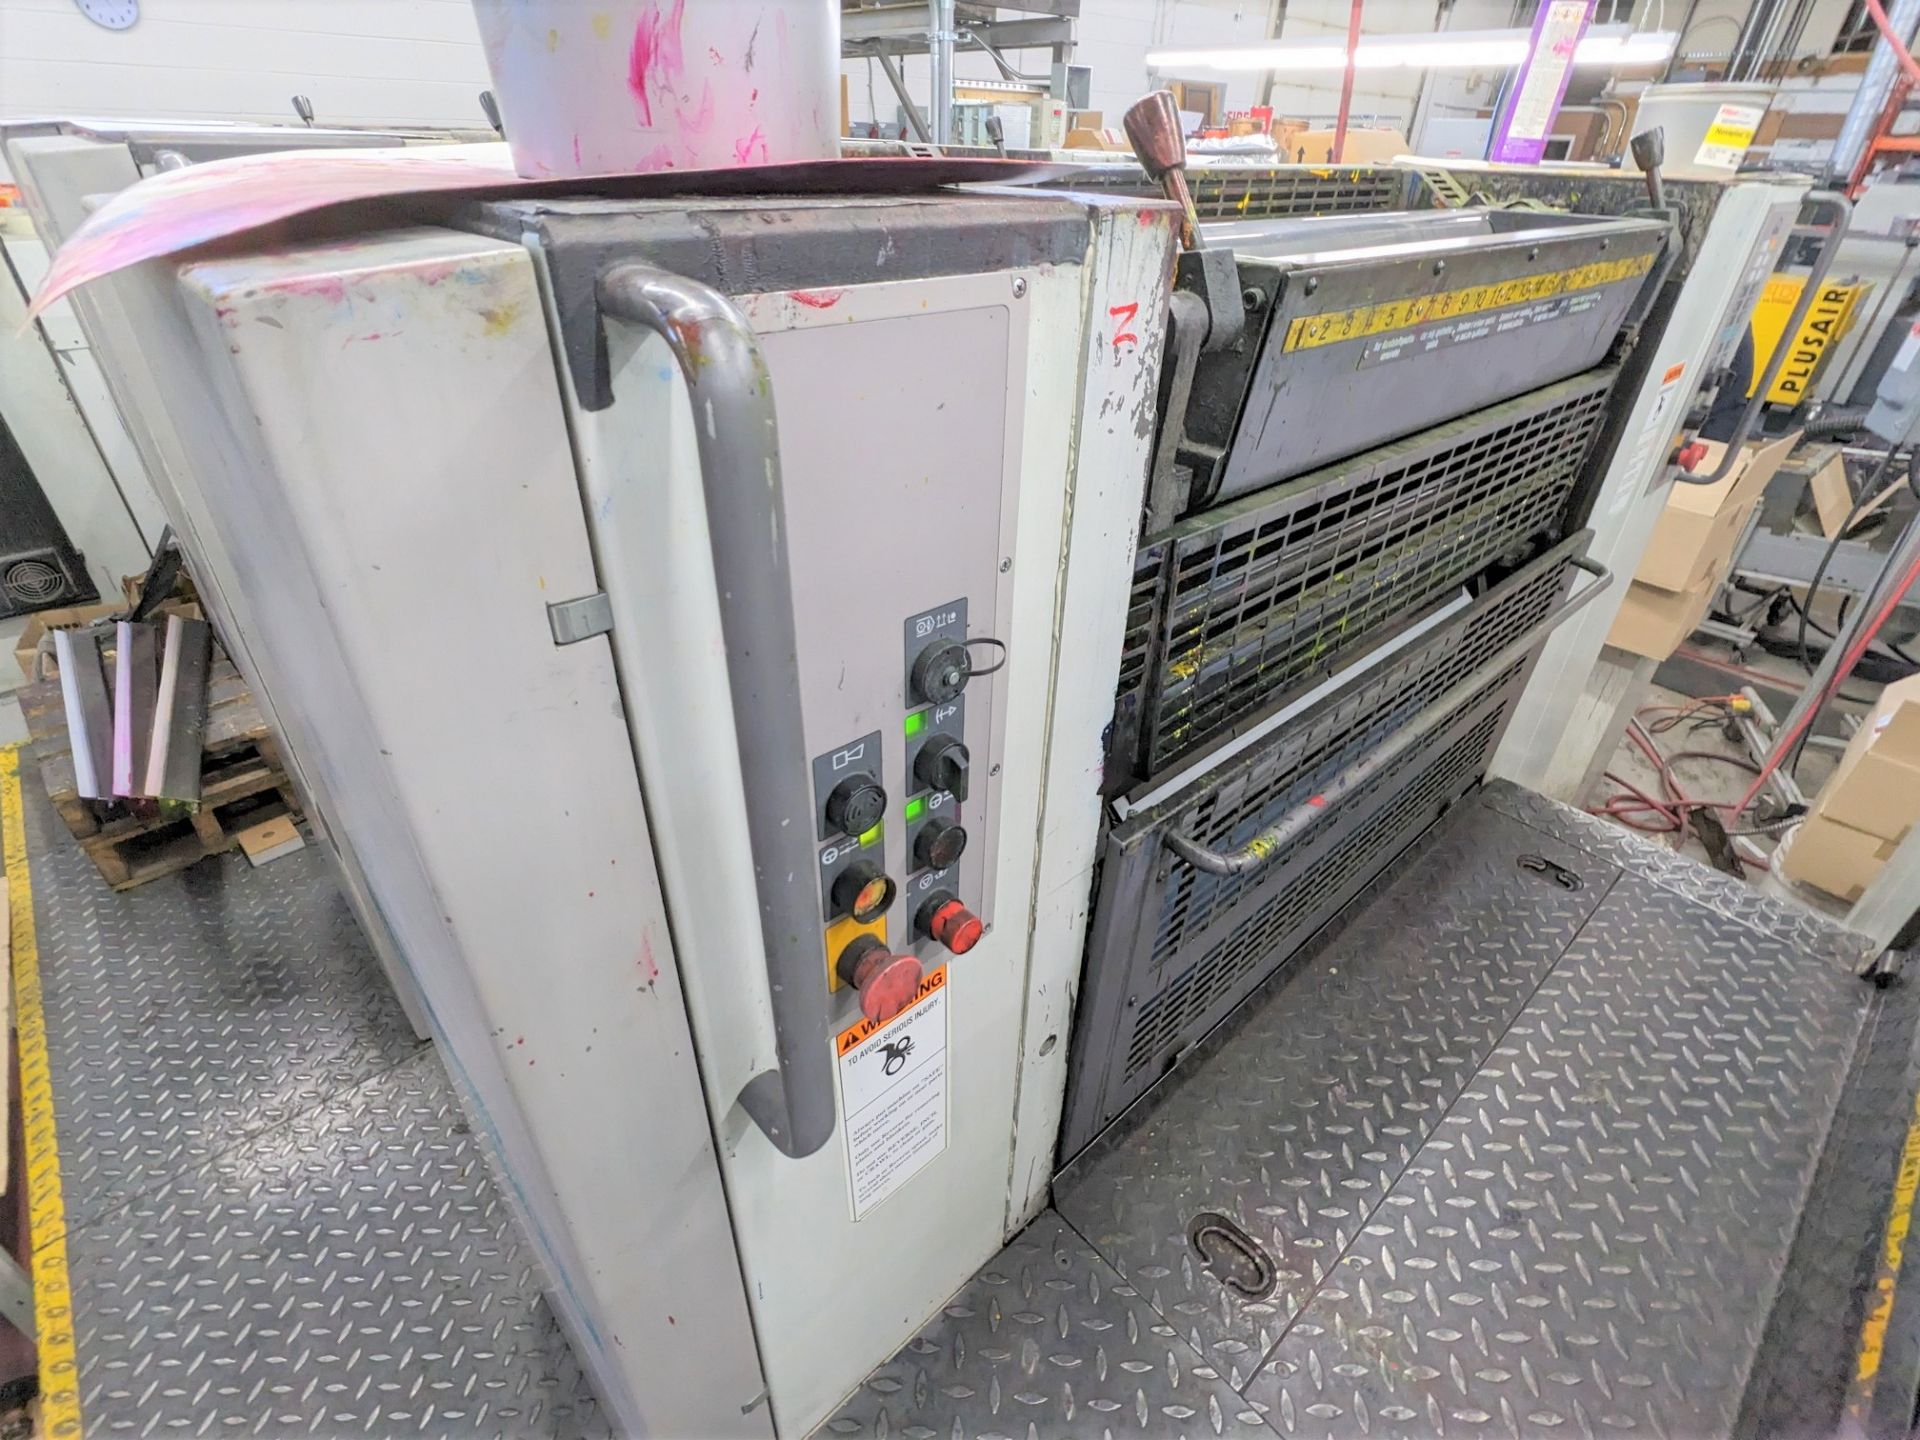 1995 MAN ROLAND 300 6-COLOUR OFFSET PRINTING PRESS, MODEL R306, S/N 25152B, TOTAL SHEET COUNT - Image 18 of 53